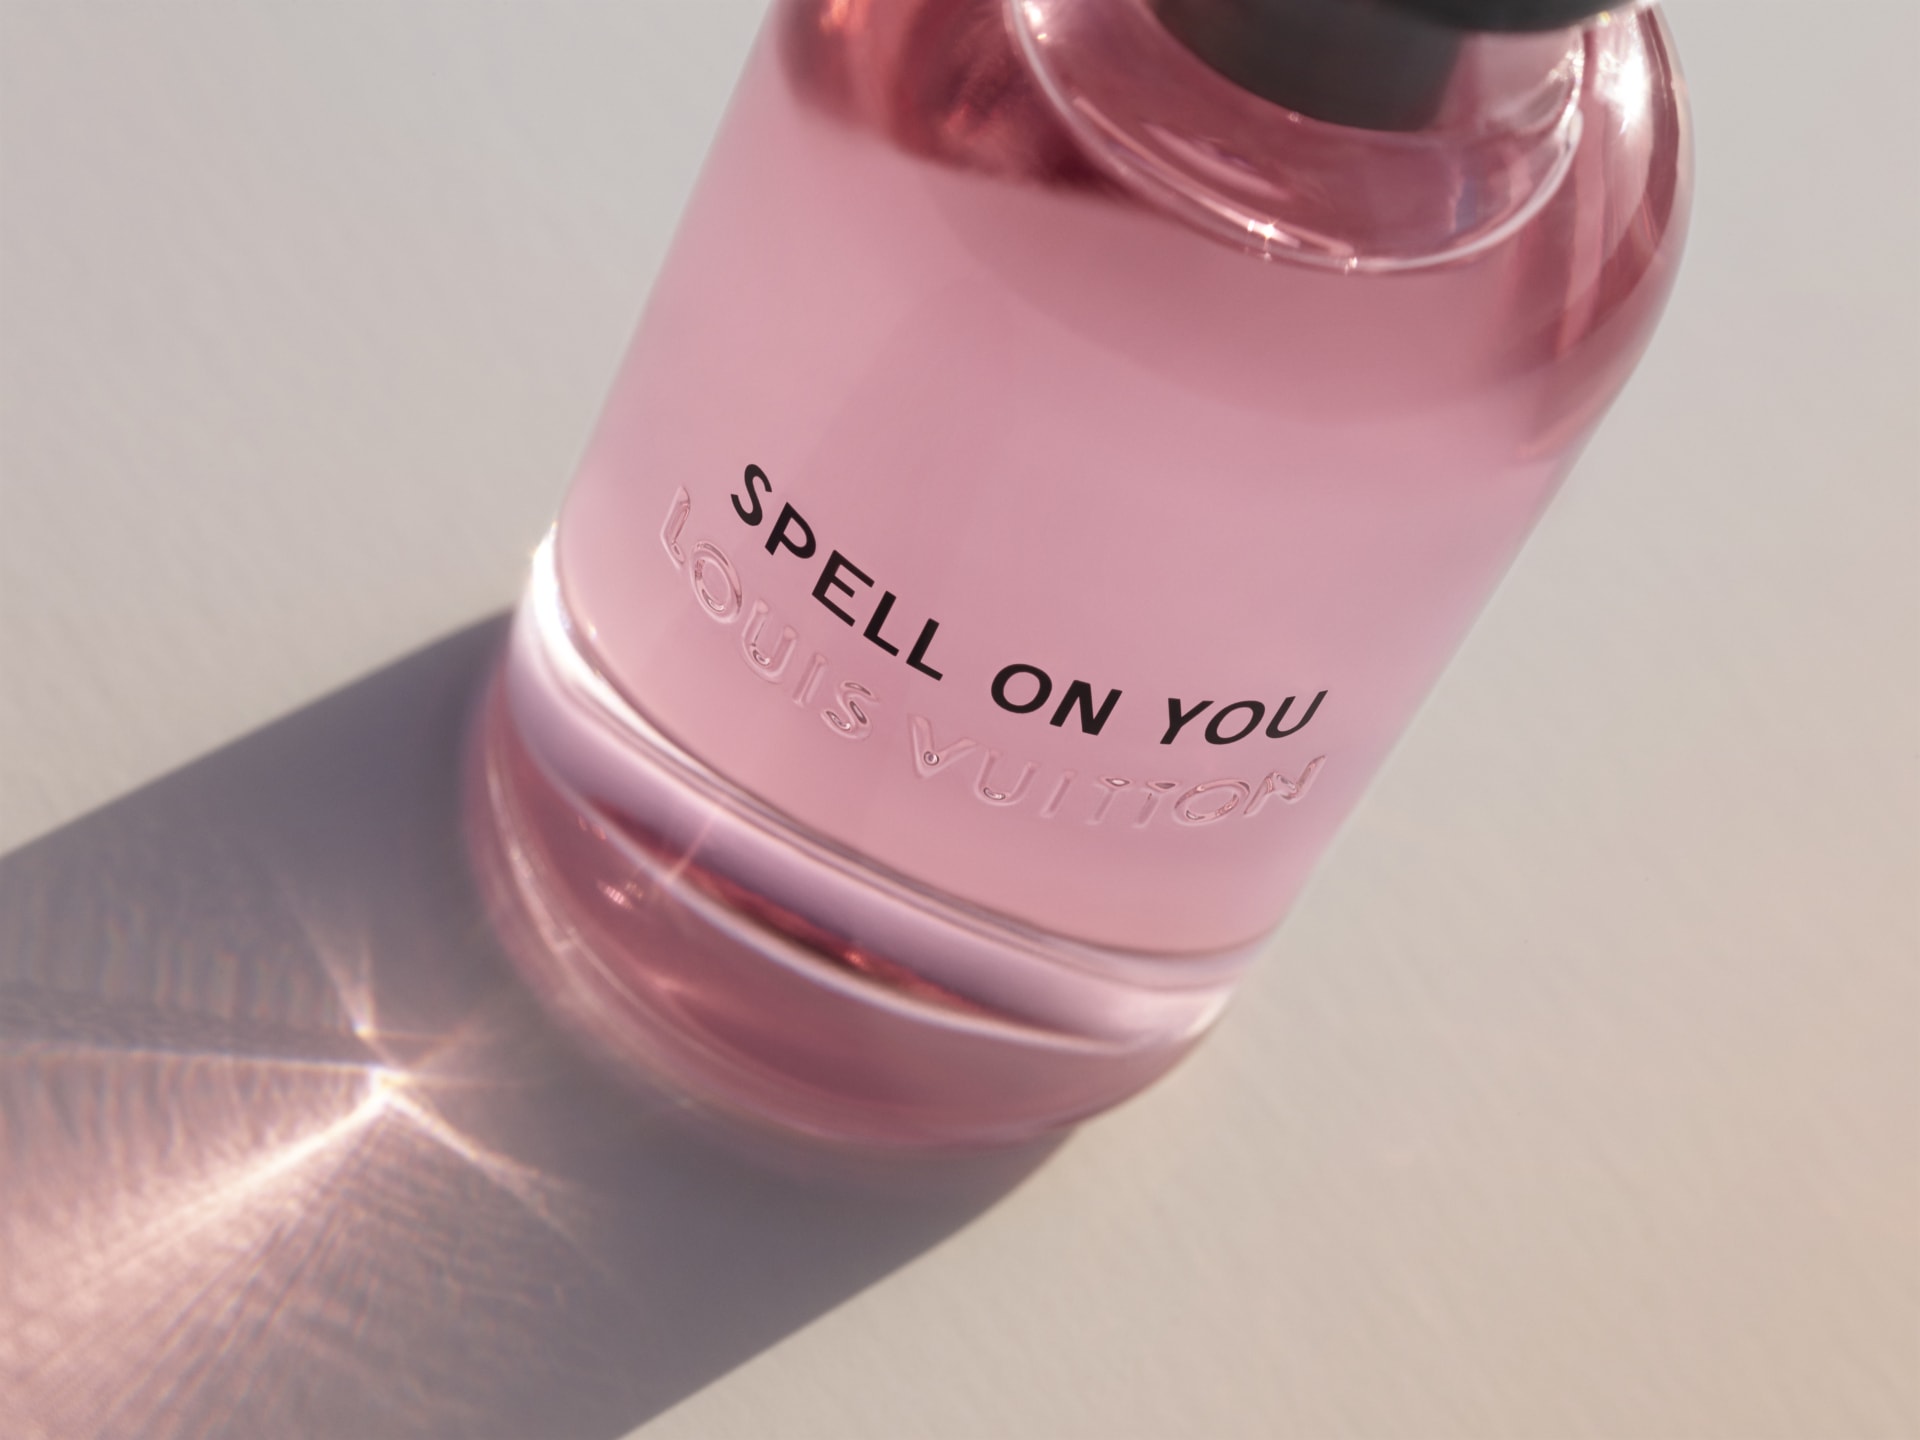 LOUIS VUITTON】大人気フレグランス「Spell On You」から限定ギフト